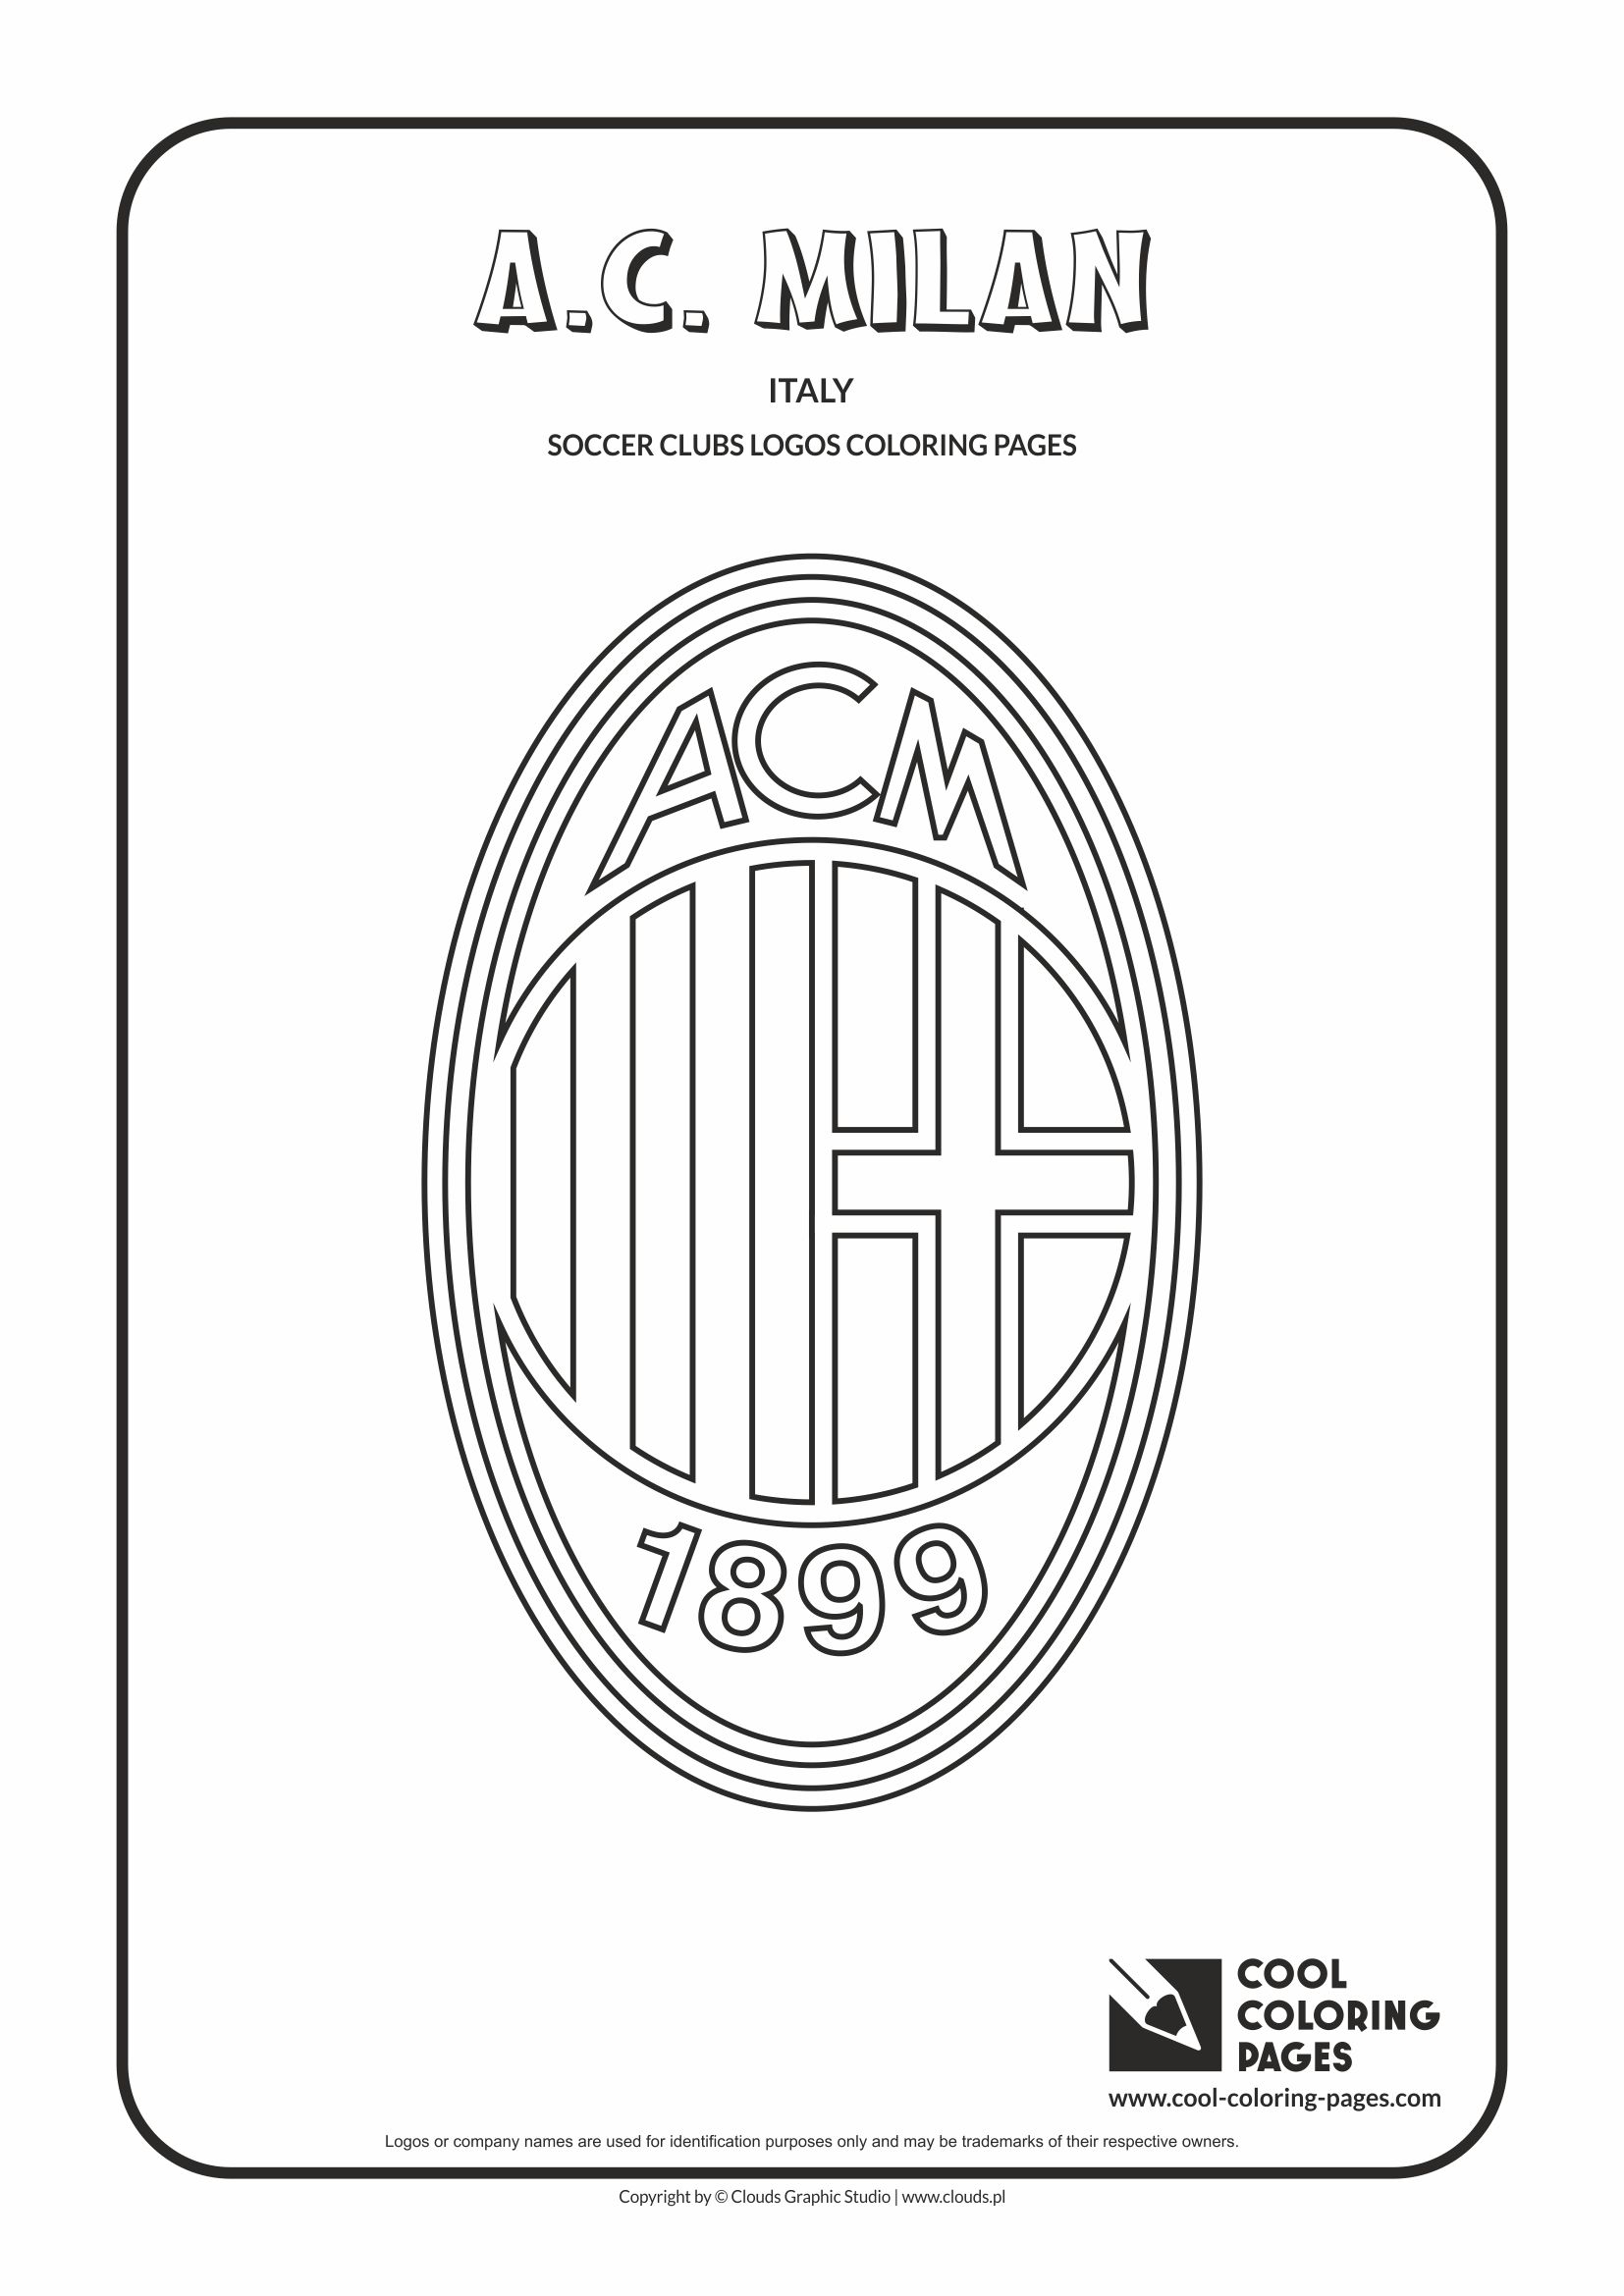 Cool Coloring Pages - Soccer Clubs Logos / A.C. Milan logo / Coloring page with A.C. Milan logo